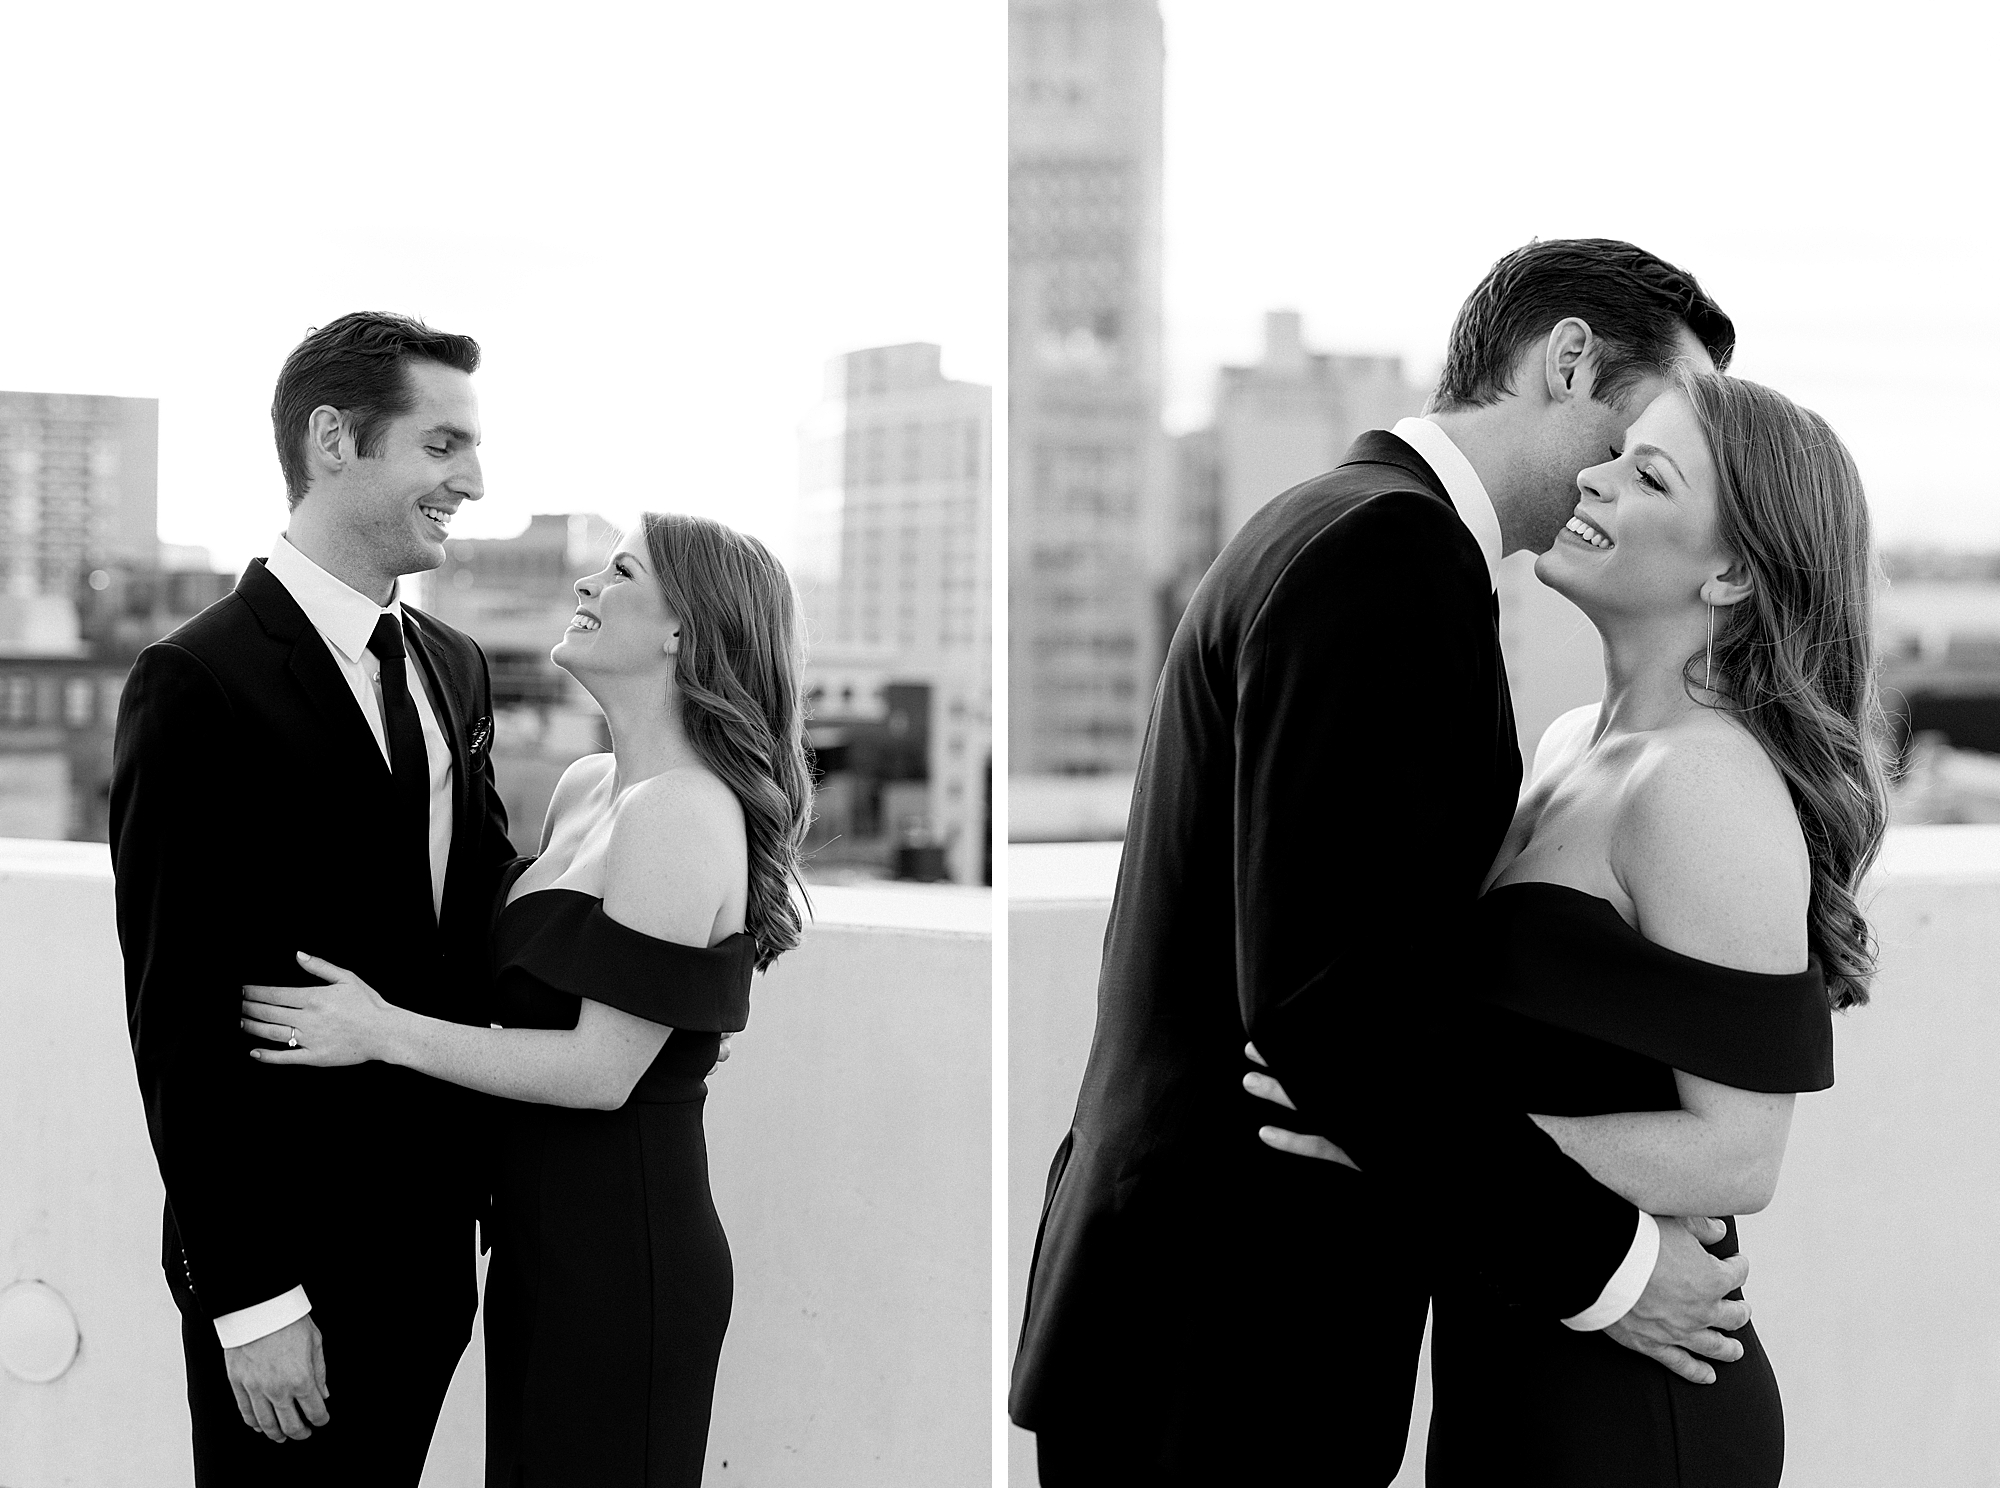 Rooftop engagement photos | Breanne Rochelle Photography